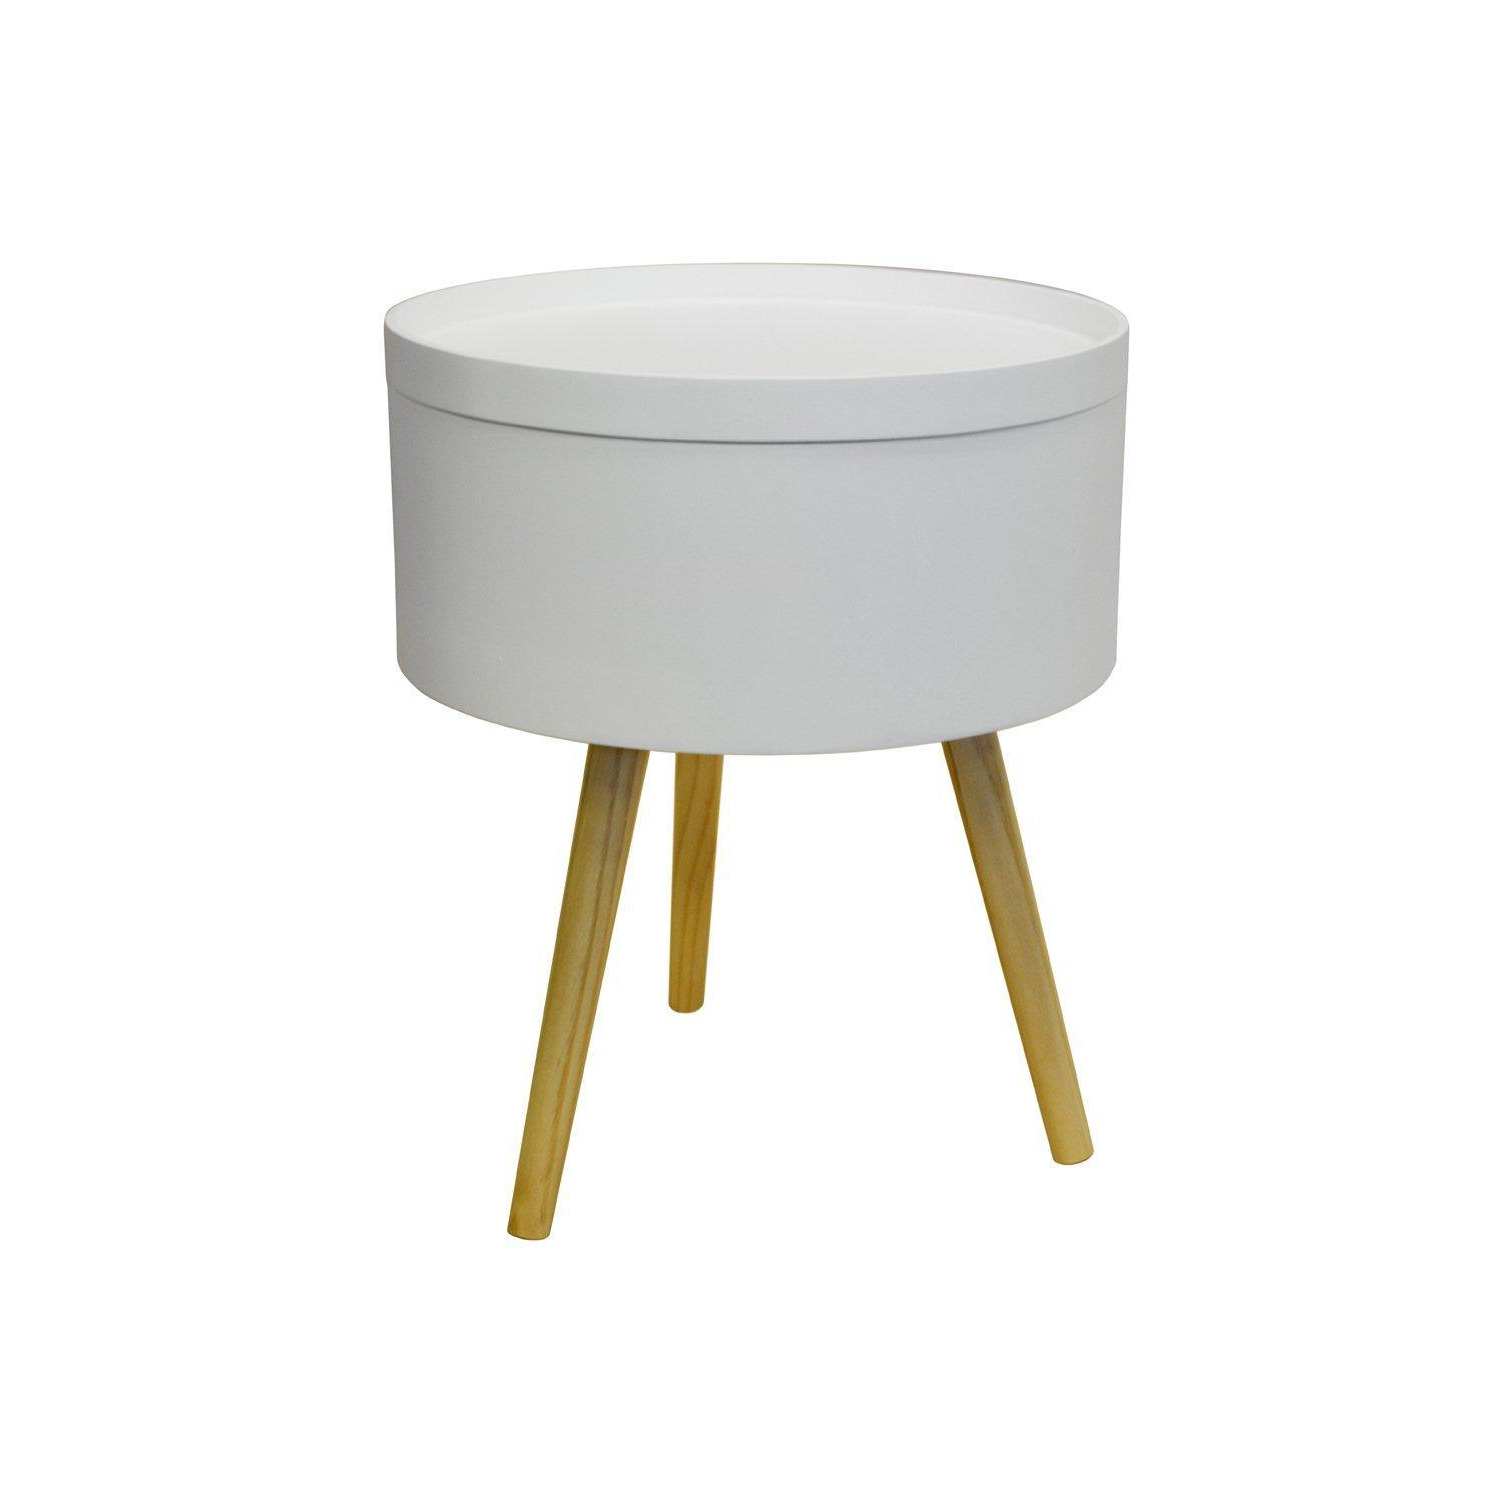 'Drum' - Retro Wood Tray Top End Table  Bedside Table - White  Natural - image 1